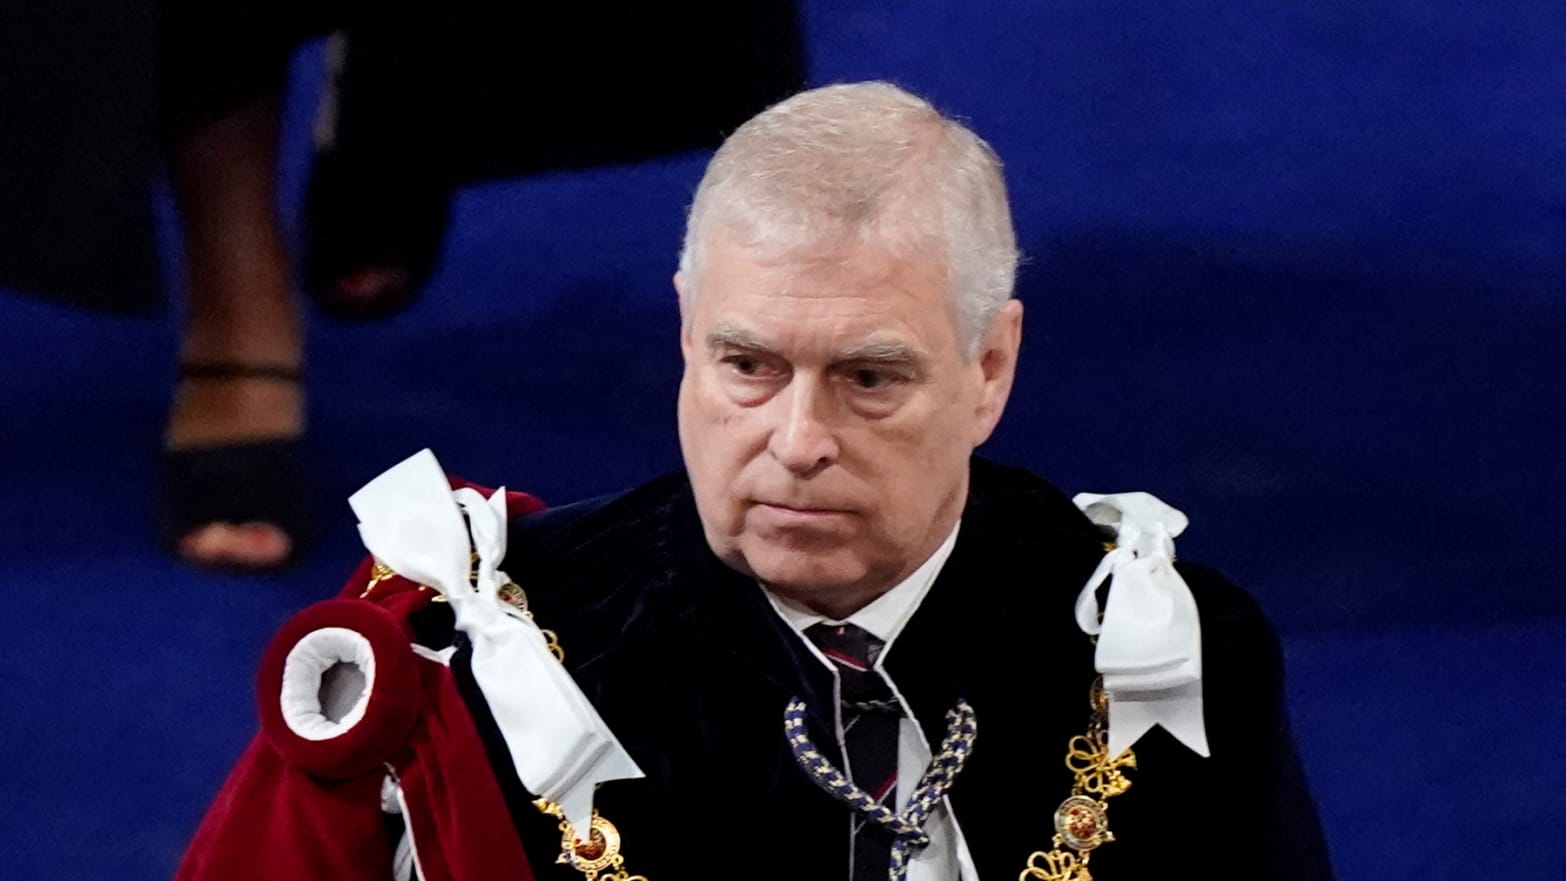 Andrew at the coronation of King Charles III 